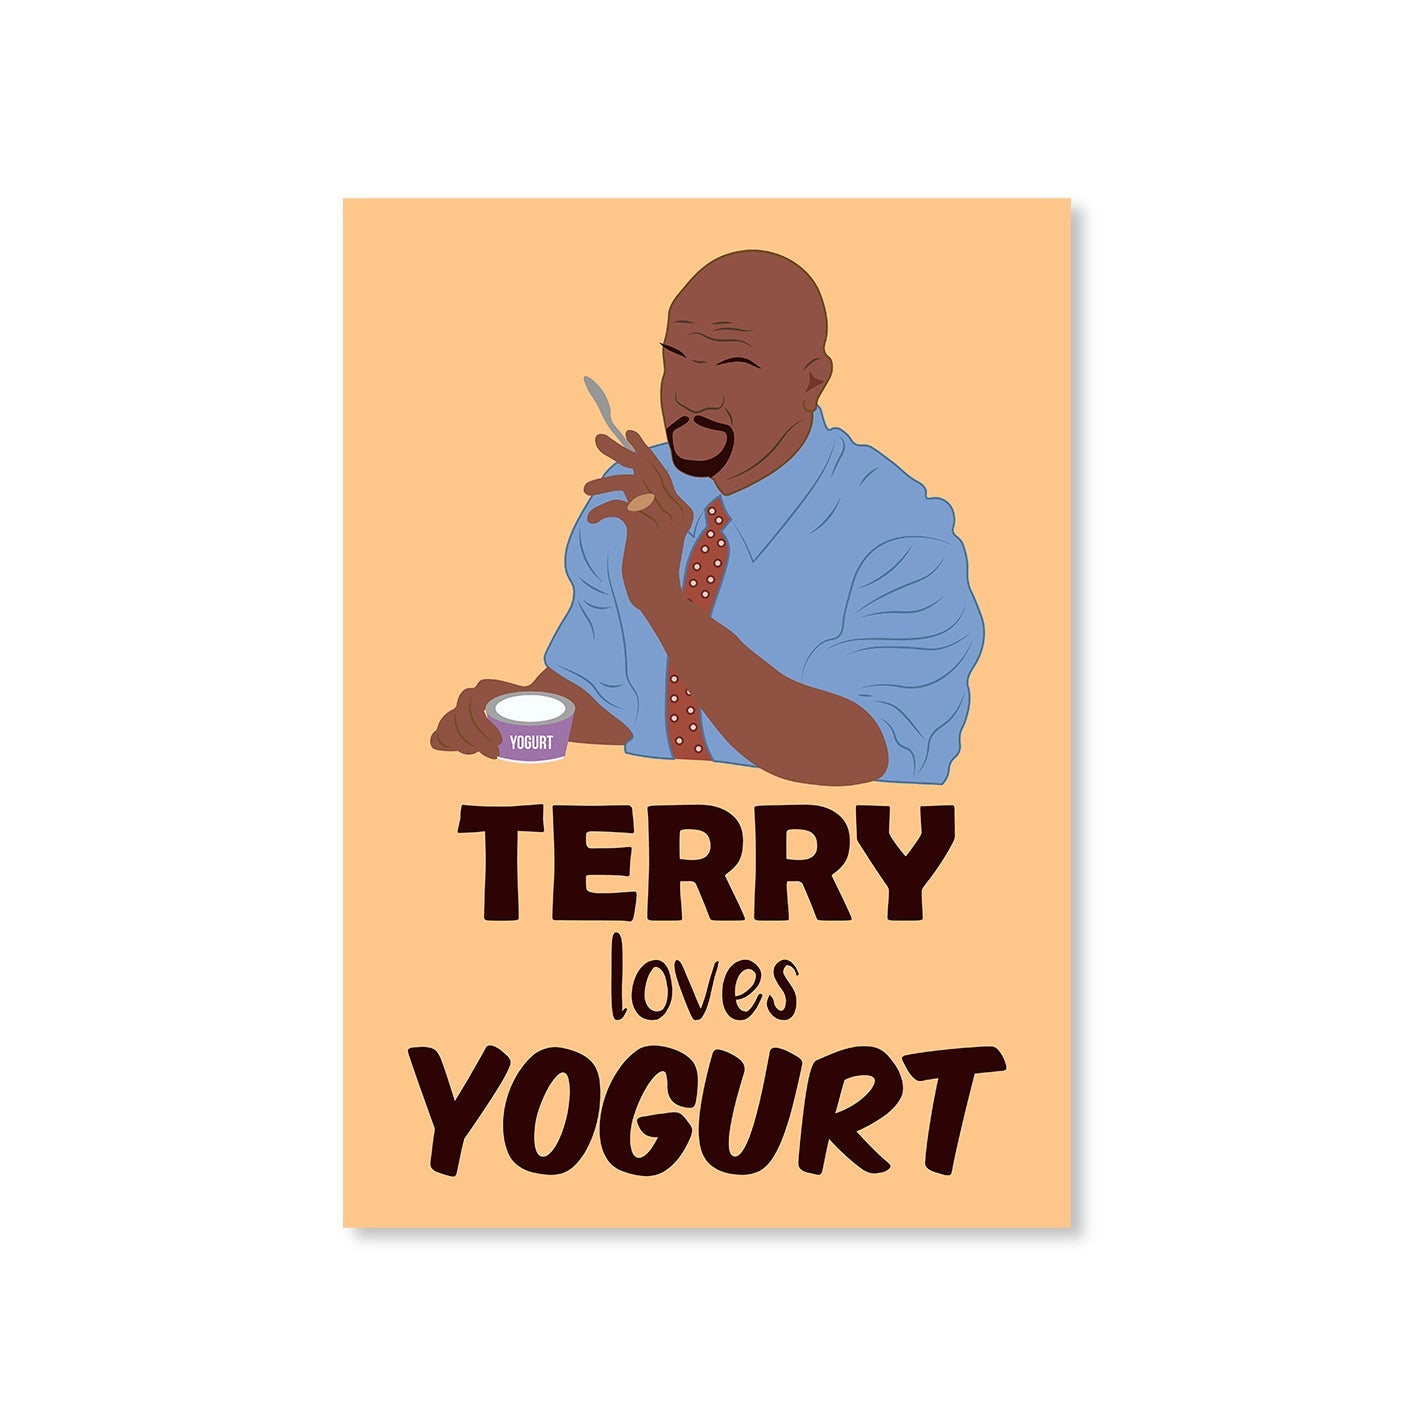 brooklyn nine-nine terry loves yogurt poster wall art buy online india the banyan tee tbt a4 detective jake peralta terry charles boyle gina linetti andy samberg merchandise clothing acceessories